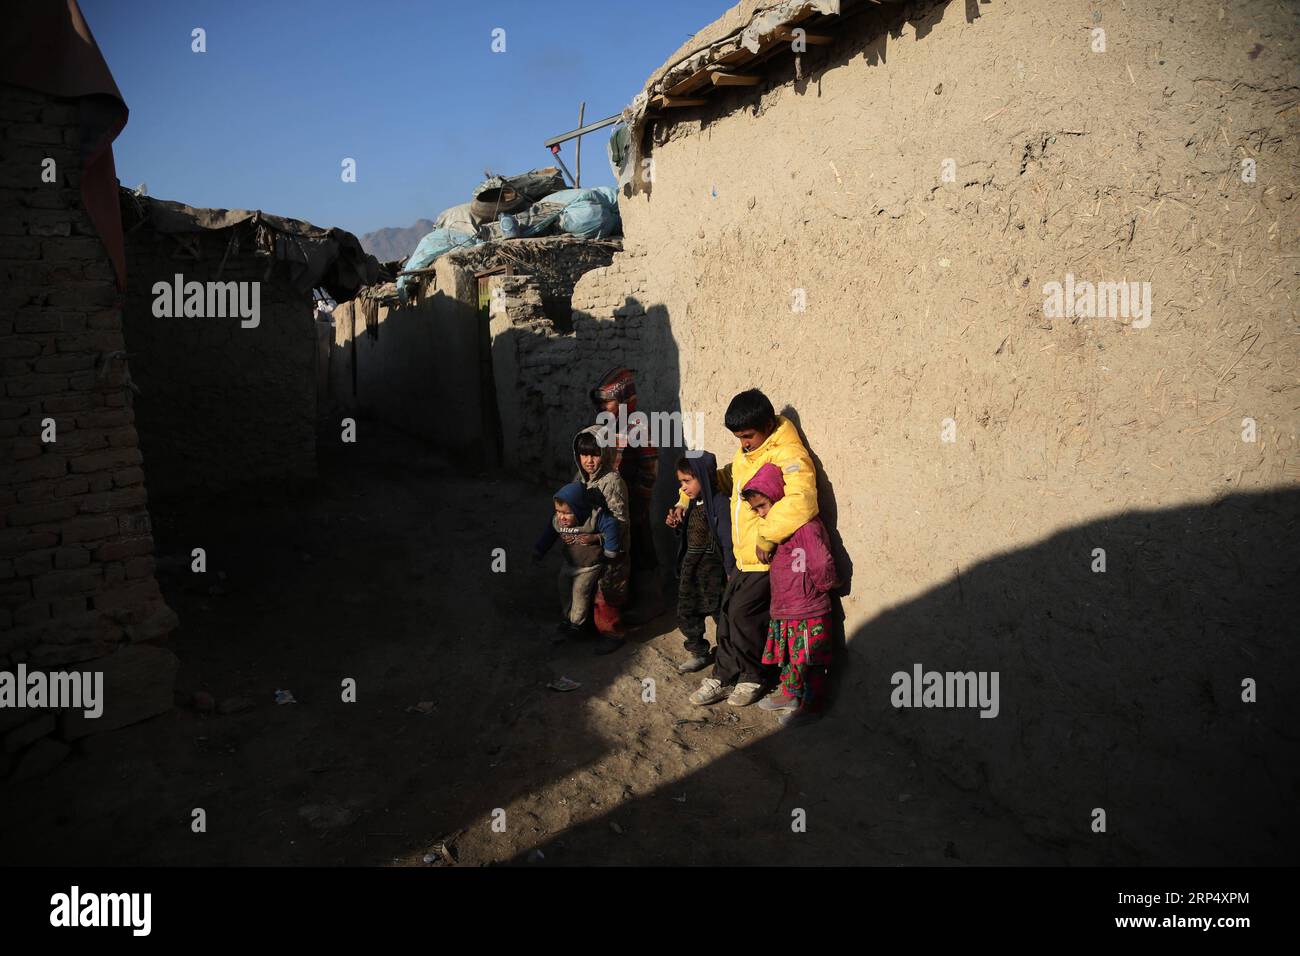 (181120) -- KABUL, Nov. 20, 2018 -- Afghan children stand outside their mud houses on World Children s Day in Kabul, capital of Afghanistan, Nov. 20, 2018. The United Nations Children s Fund (UNICEF) office in Afghanistan said on Monday that about 3.7 million Afghan children have no access to school due to insecurity and poverty in the country. ) AFGHANISTAN-KABUL-WORLD CHILDREN DAY RahmatxAlizadah PUBLICATIONxNOTxINxCHN Stock Photo